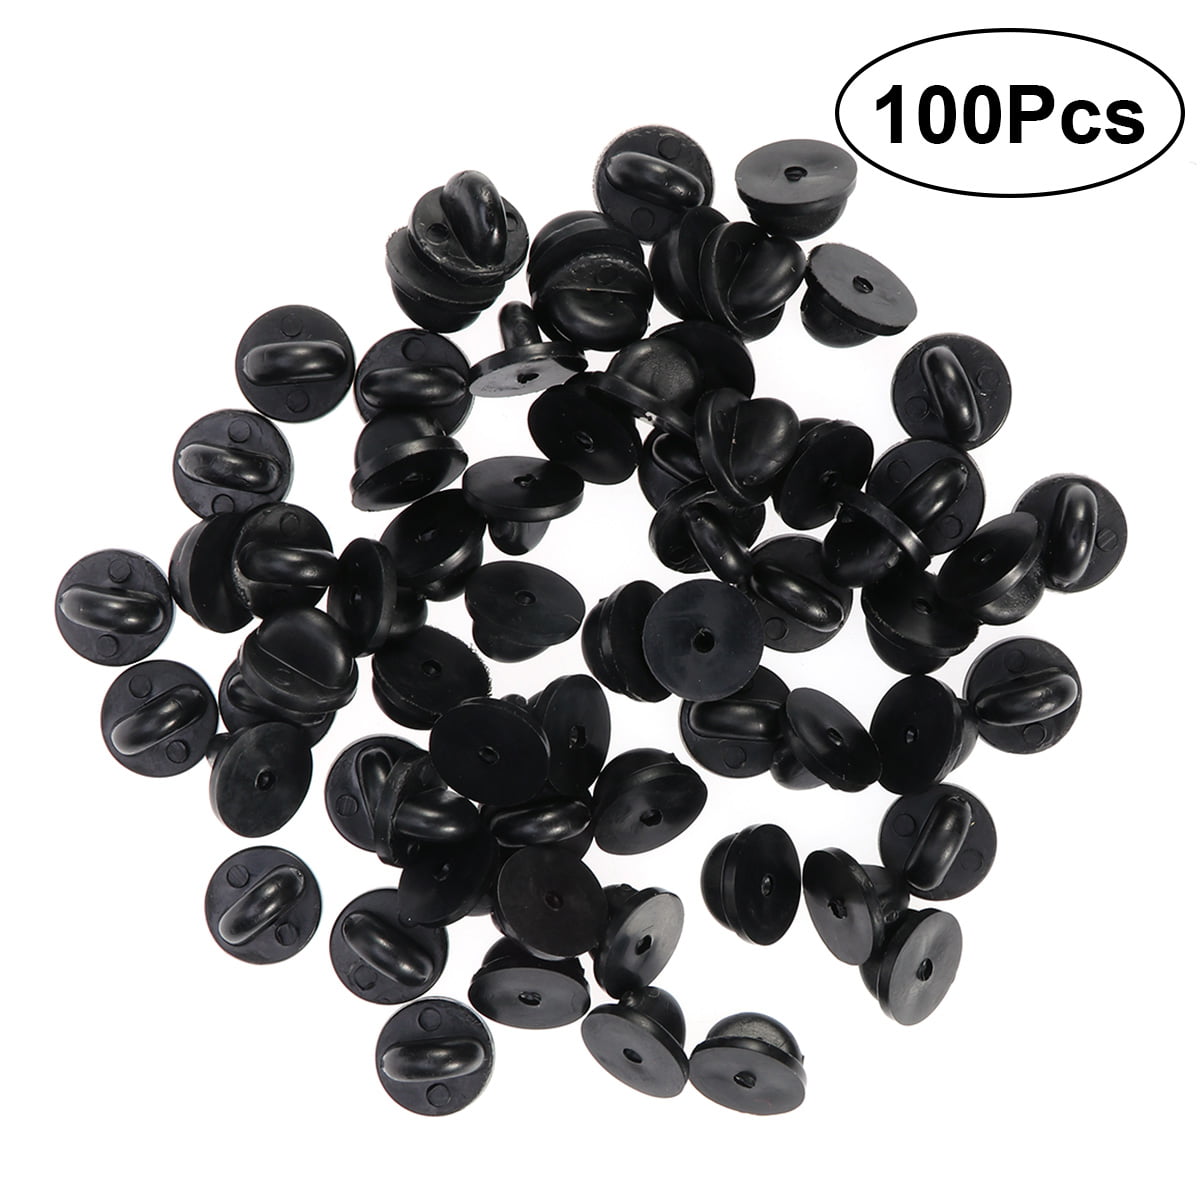 100pcs Butterfly Clutch Rubber Pin Backs Keepers for Replacement Uniform Badge